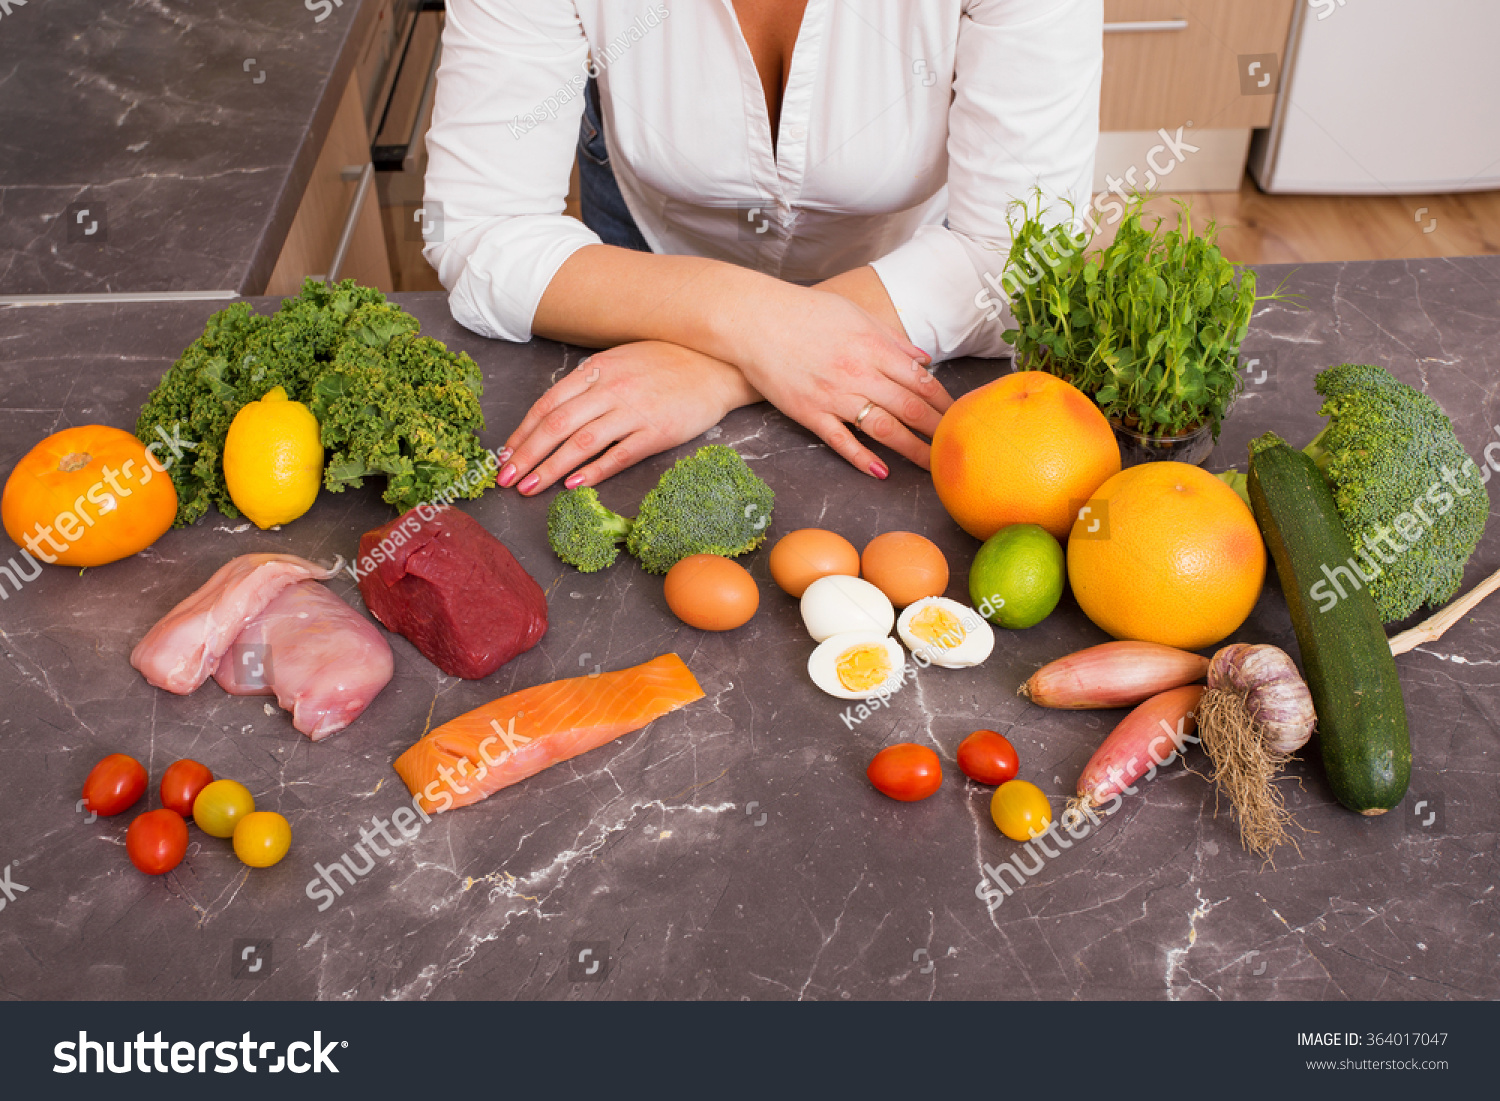 Woman in kitchen with different raw foods  #364017047